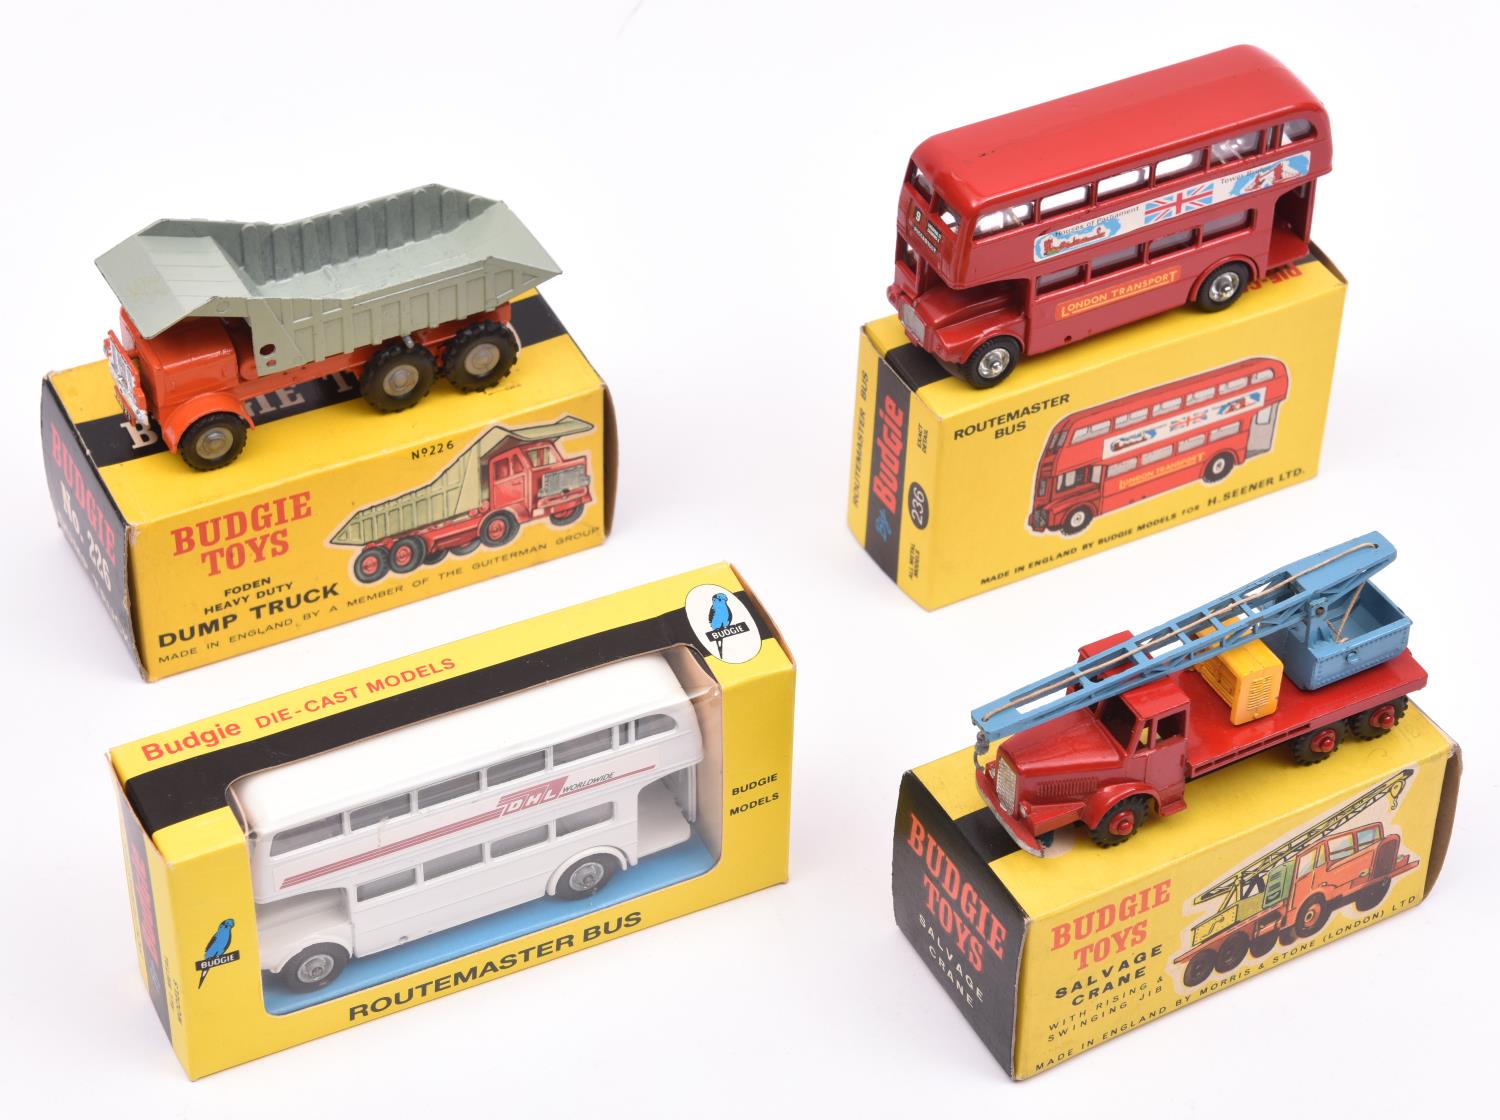 4 Budgie Toys. Foden Heavy Duty Dump Truck (226). In orange and grey livery. A Salvage Crane (214)